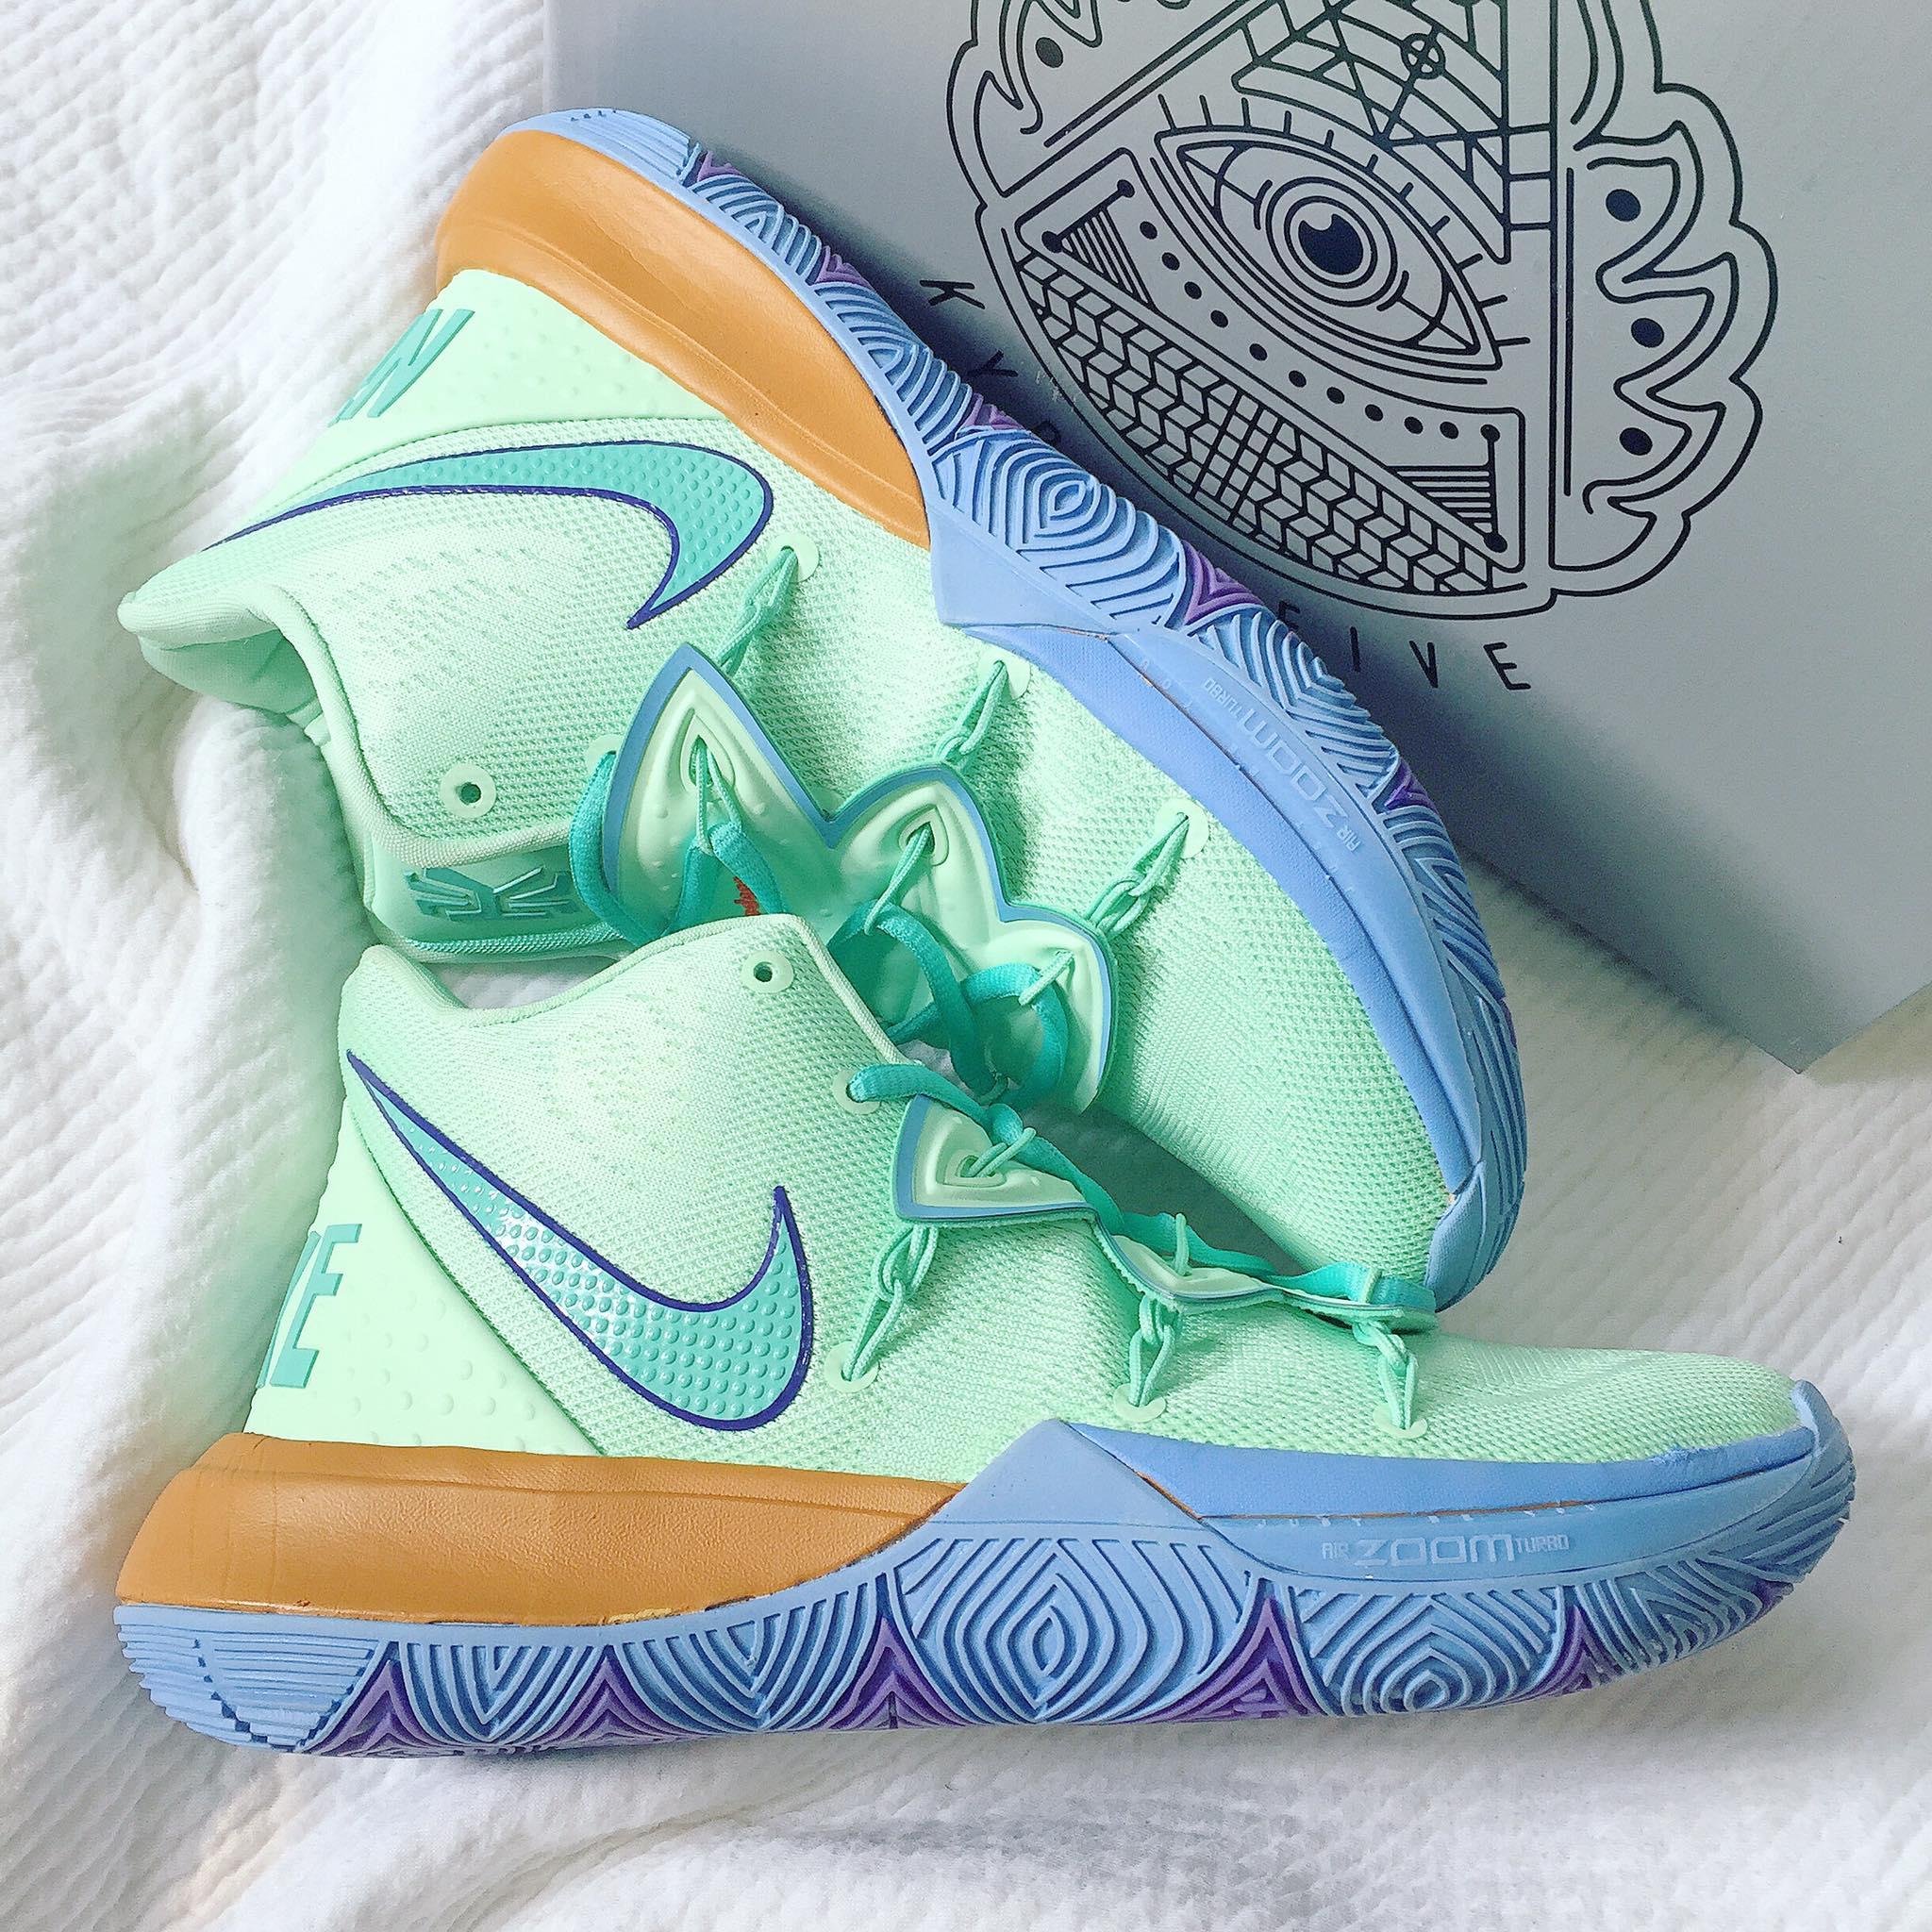 kyrie squidward shoes price